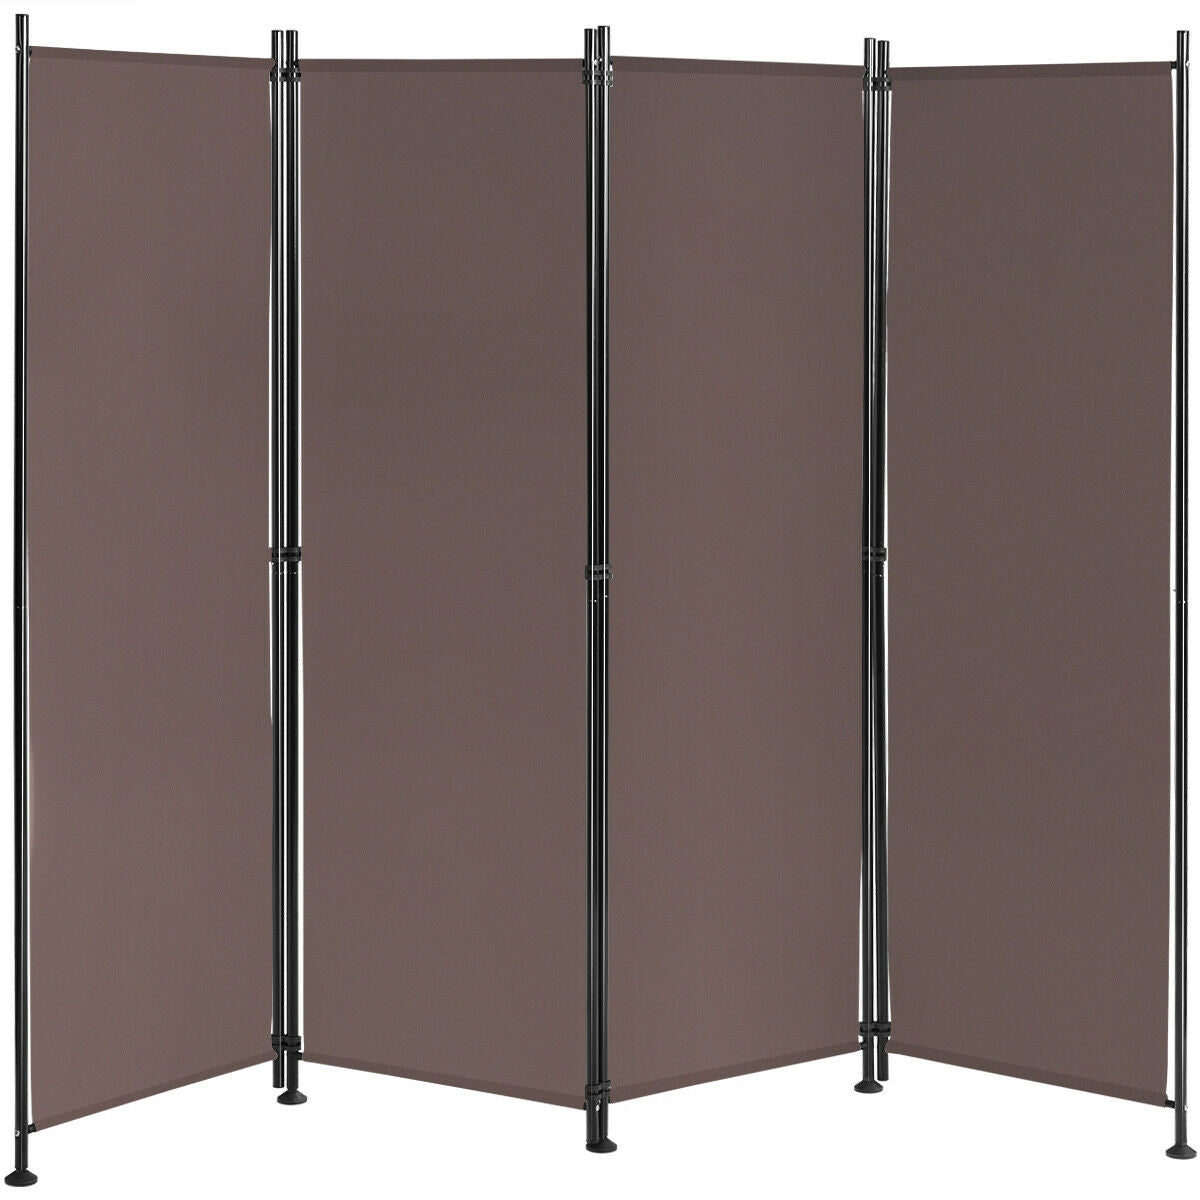 4-Panel Room Divider Folding Privacy Screen-Brown